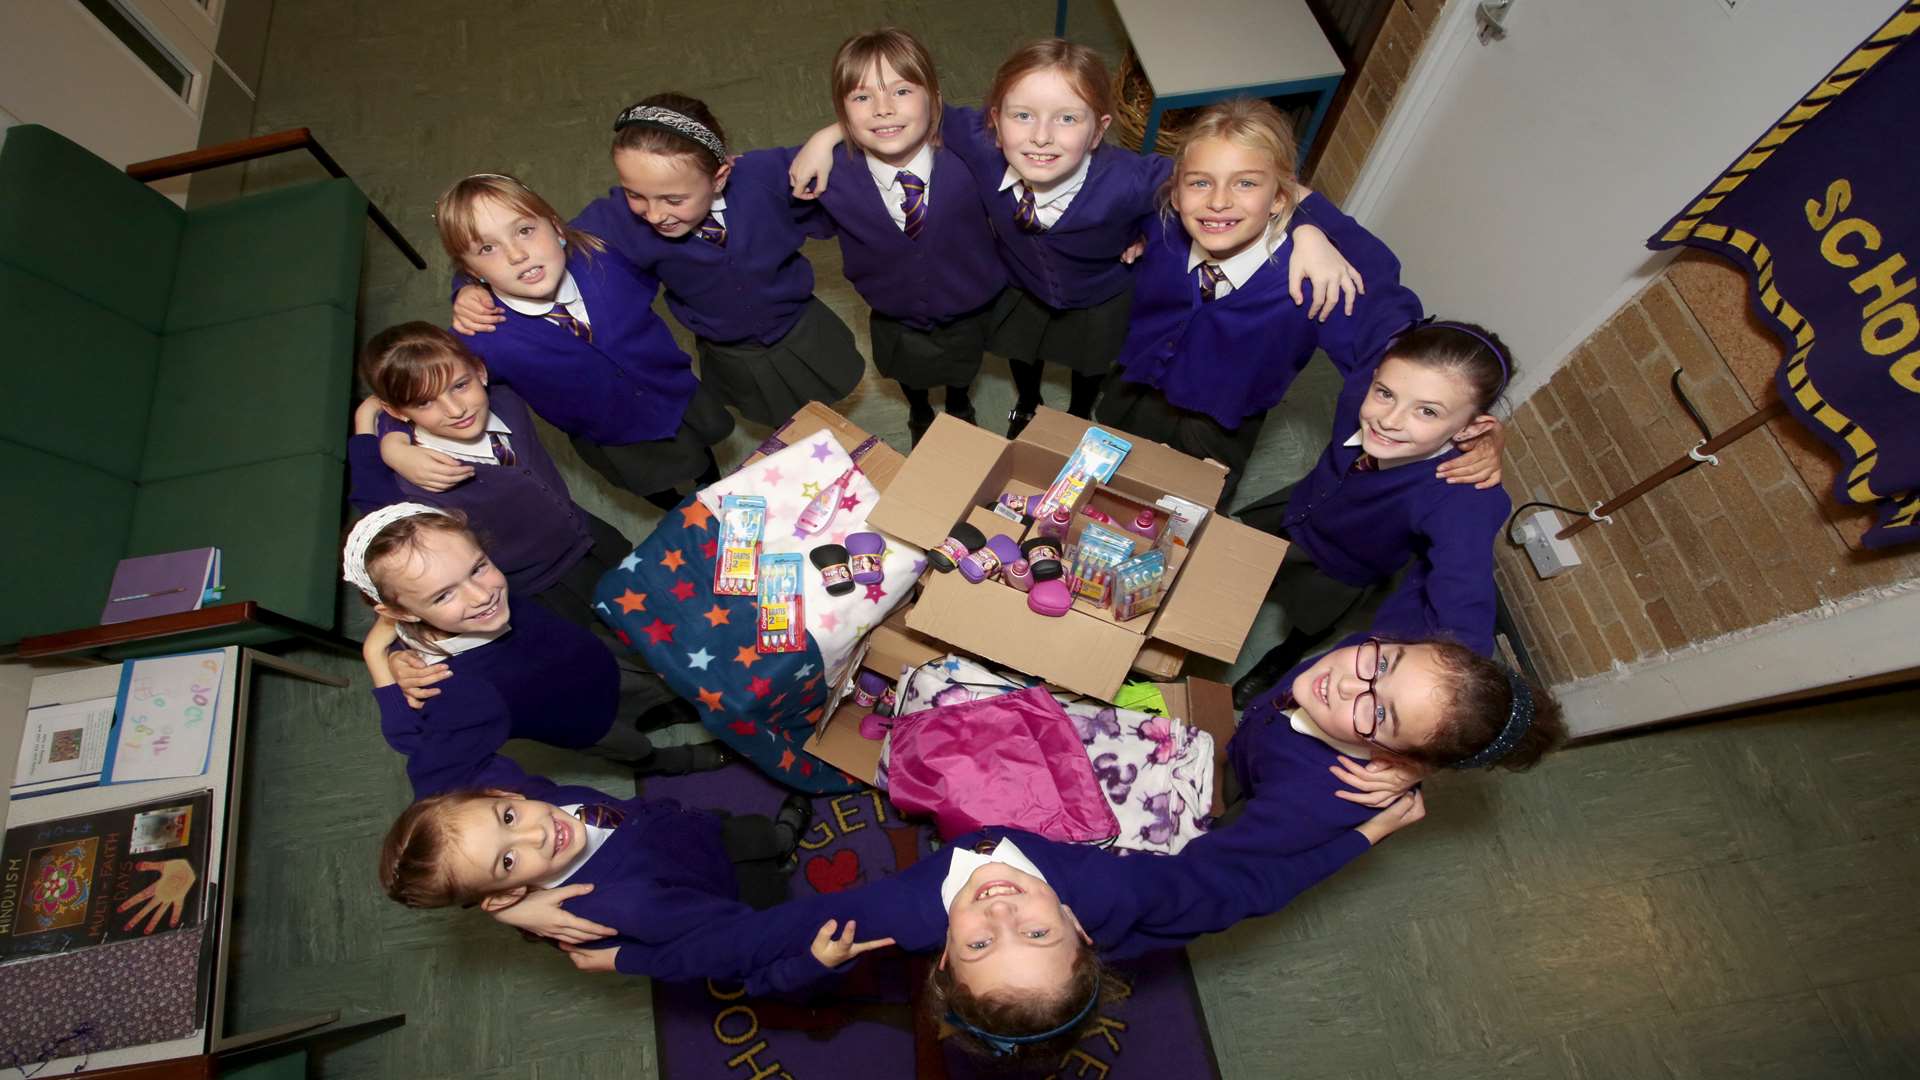 Hannah's classmates donated money and equipment for Great Ormond Street Hospital